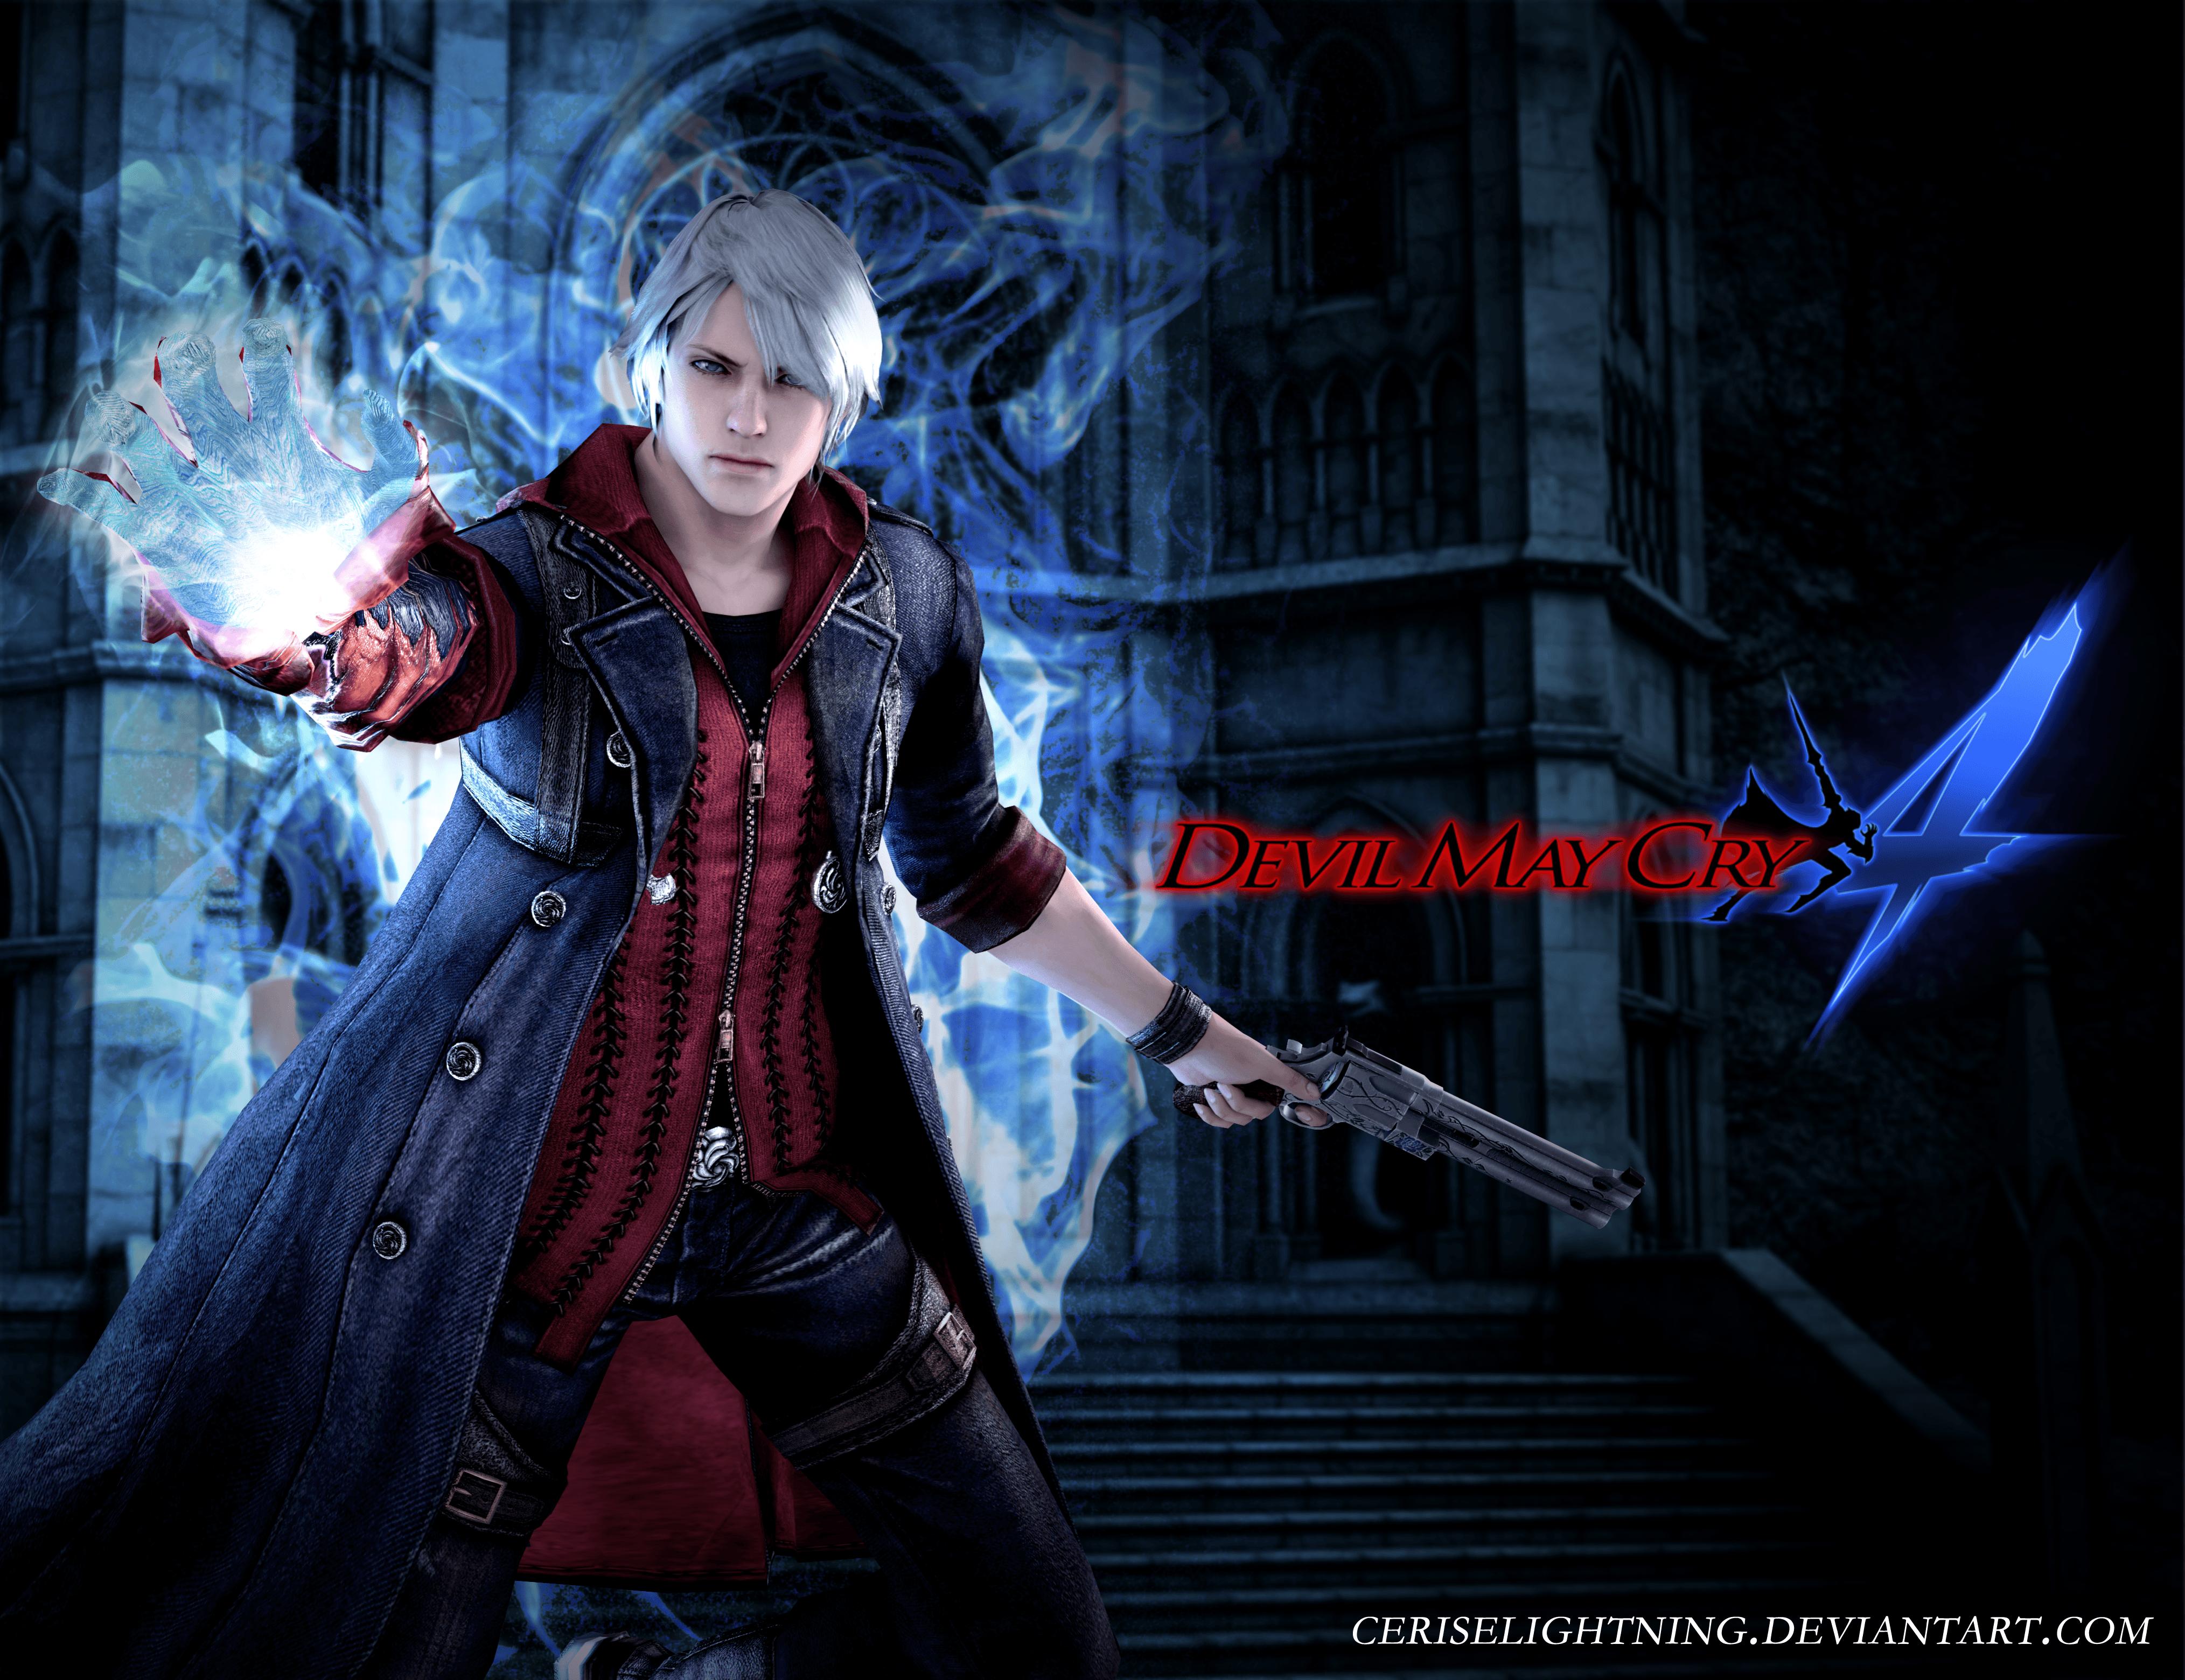 Devil May Cry 4 Wallpaper (1920x1080)